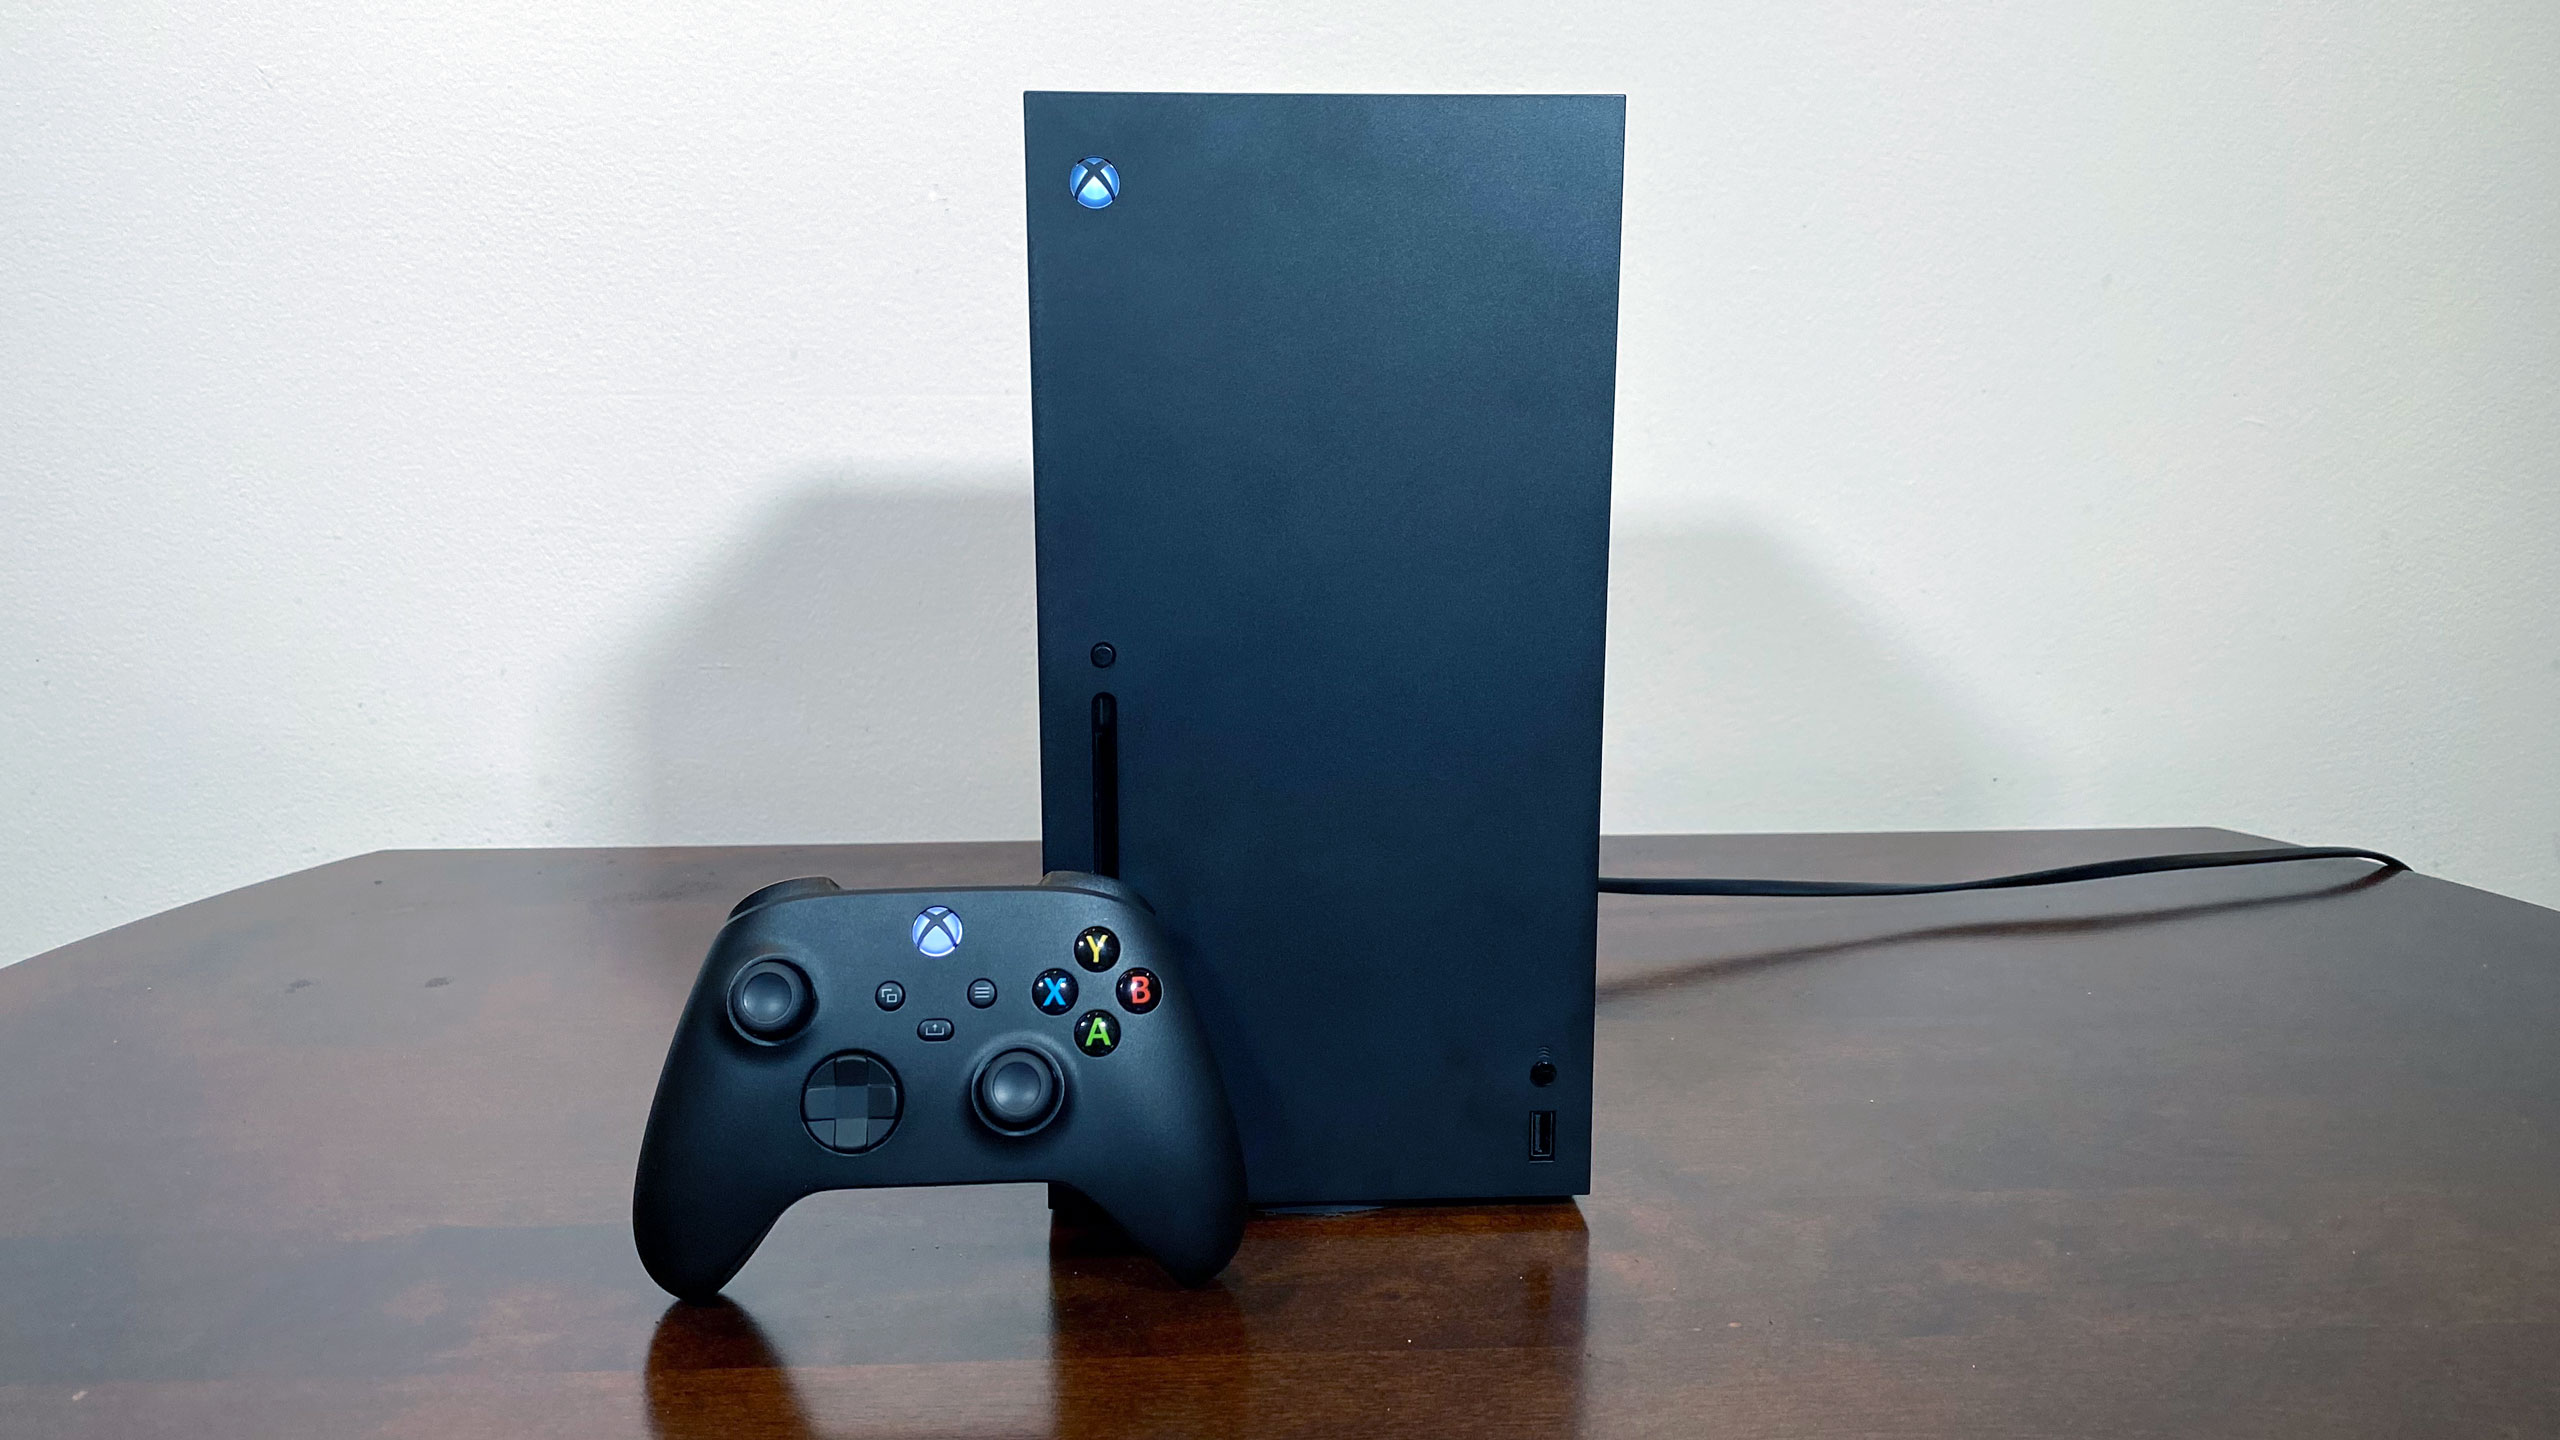 Xbox Series X Review: Microsoft's Hybrid Console HTPC Rocks - Page 2